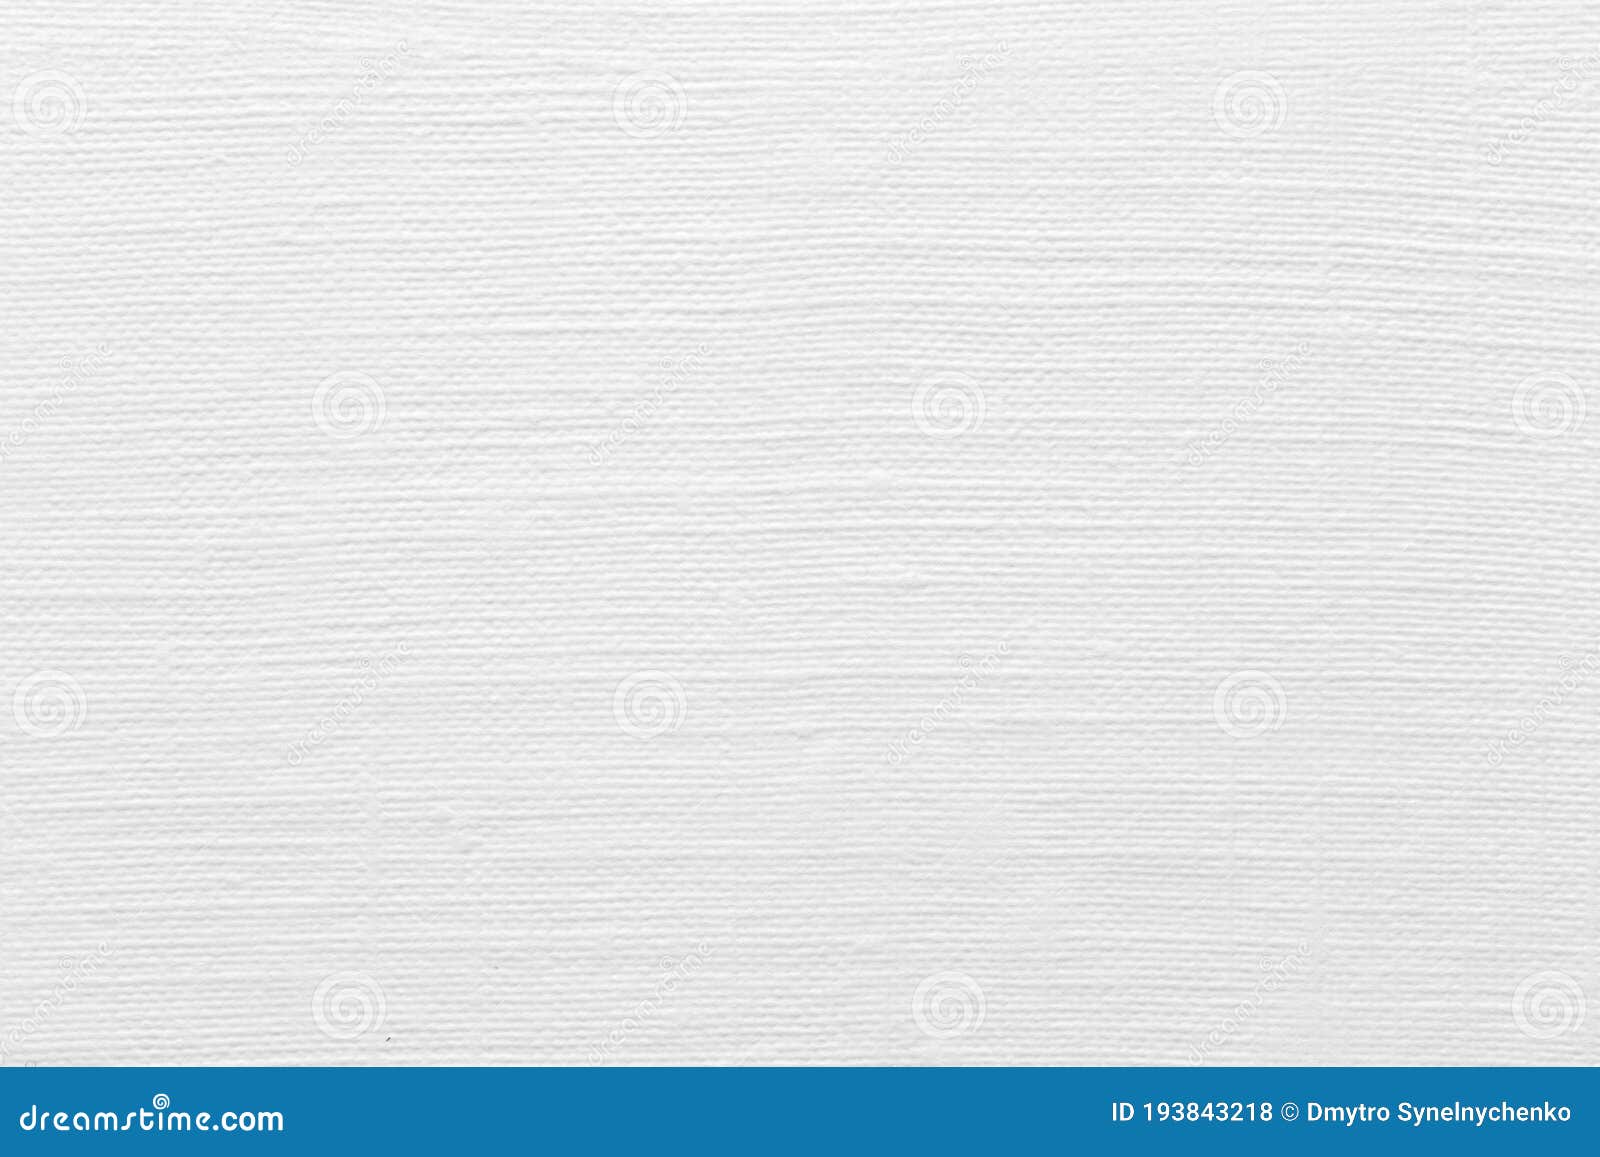 Top View of White Linen Paper Background Texture. Stock Photo